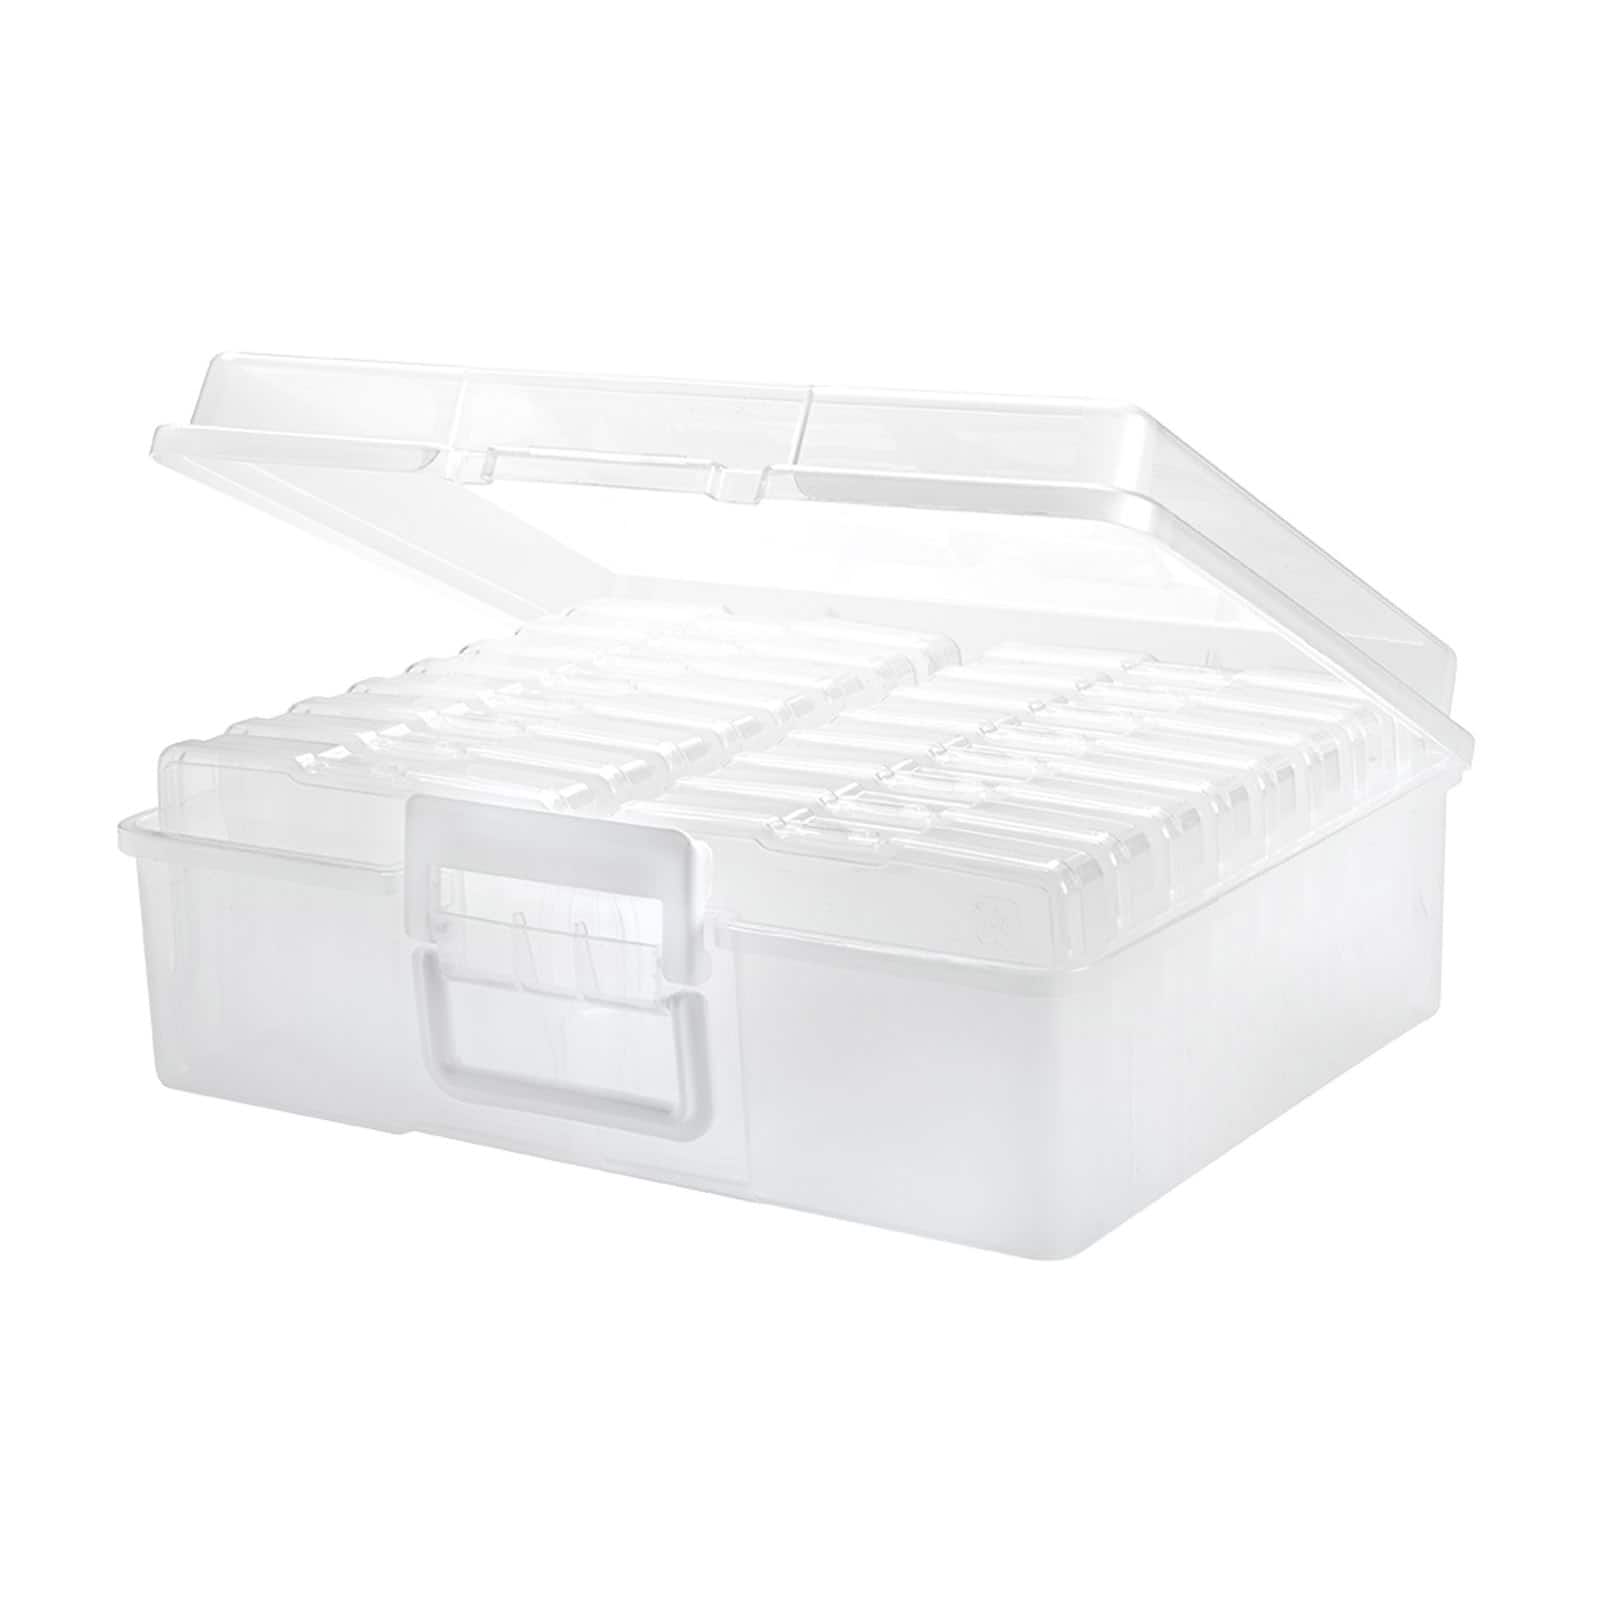 Craft Box Organiser Toys Jewelery Storage Case Clear Plastic Suitcase Portable 